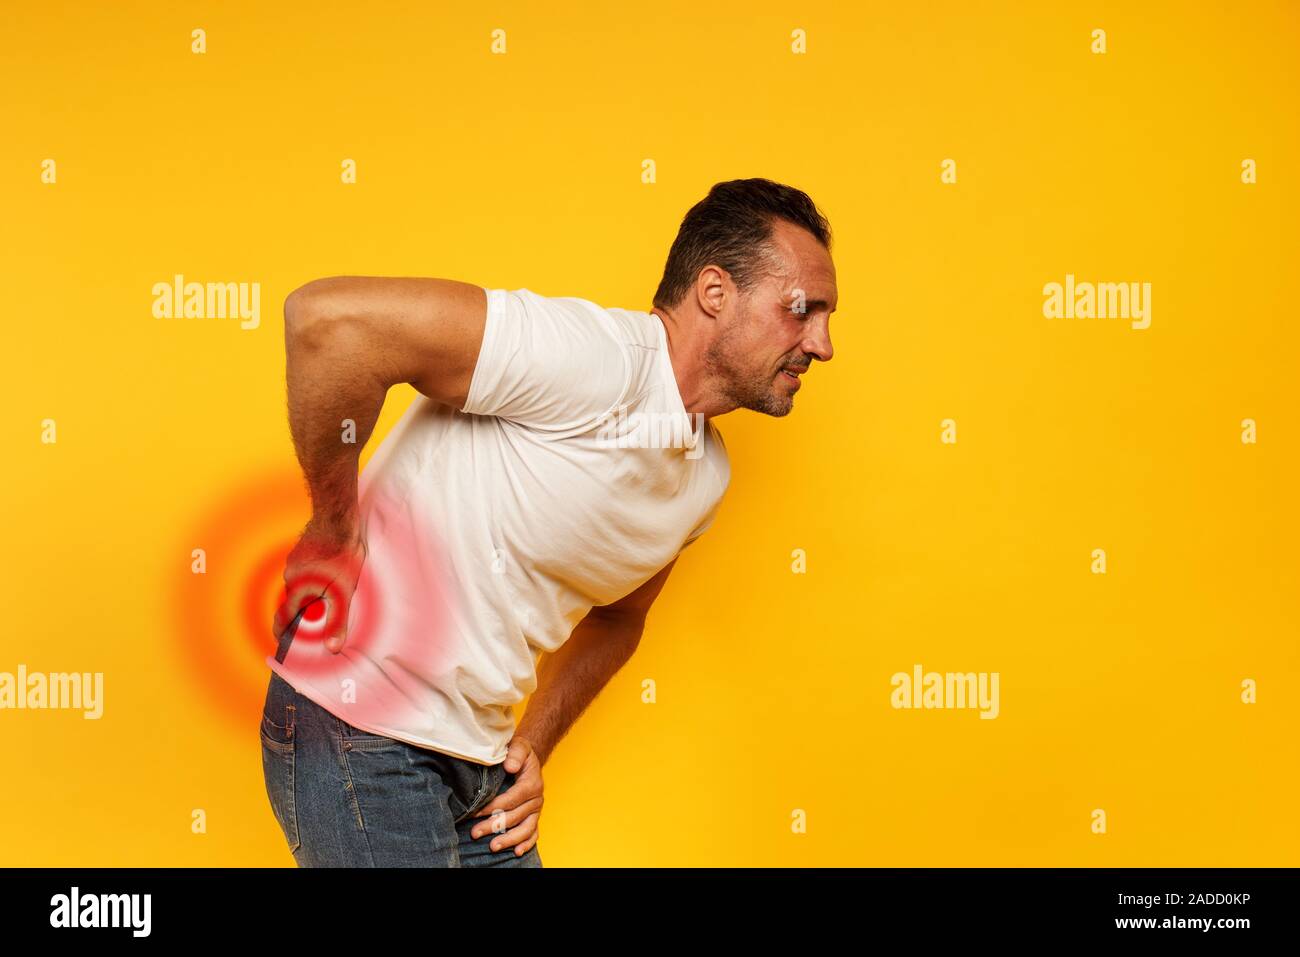 Aching man with back pain. Yellow background Stock Photo